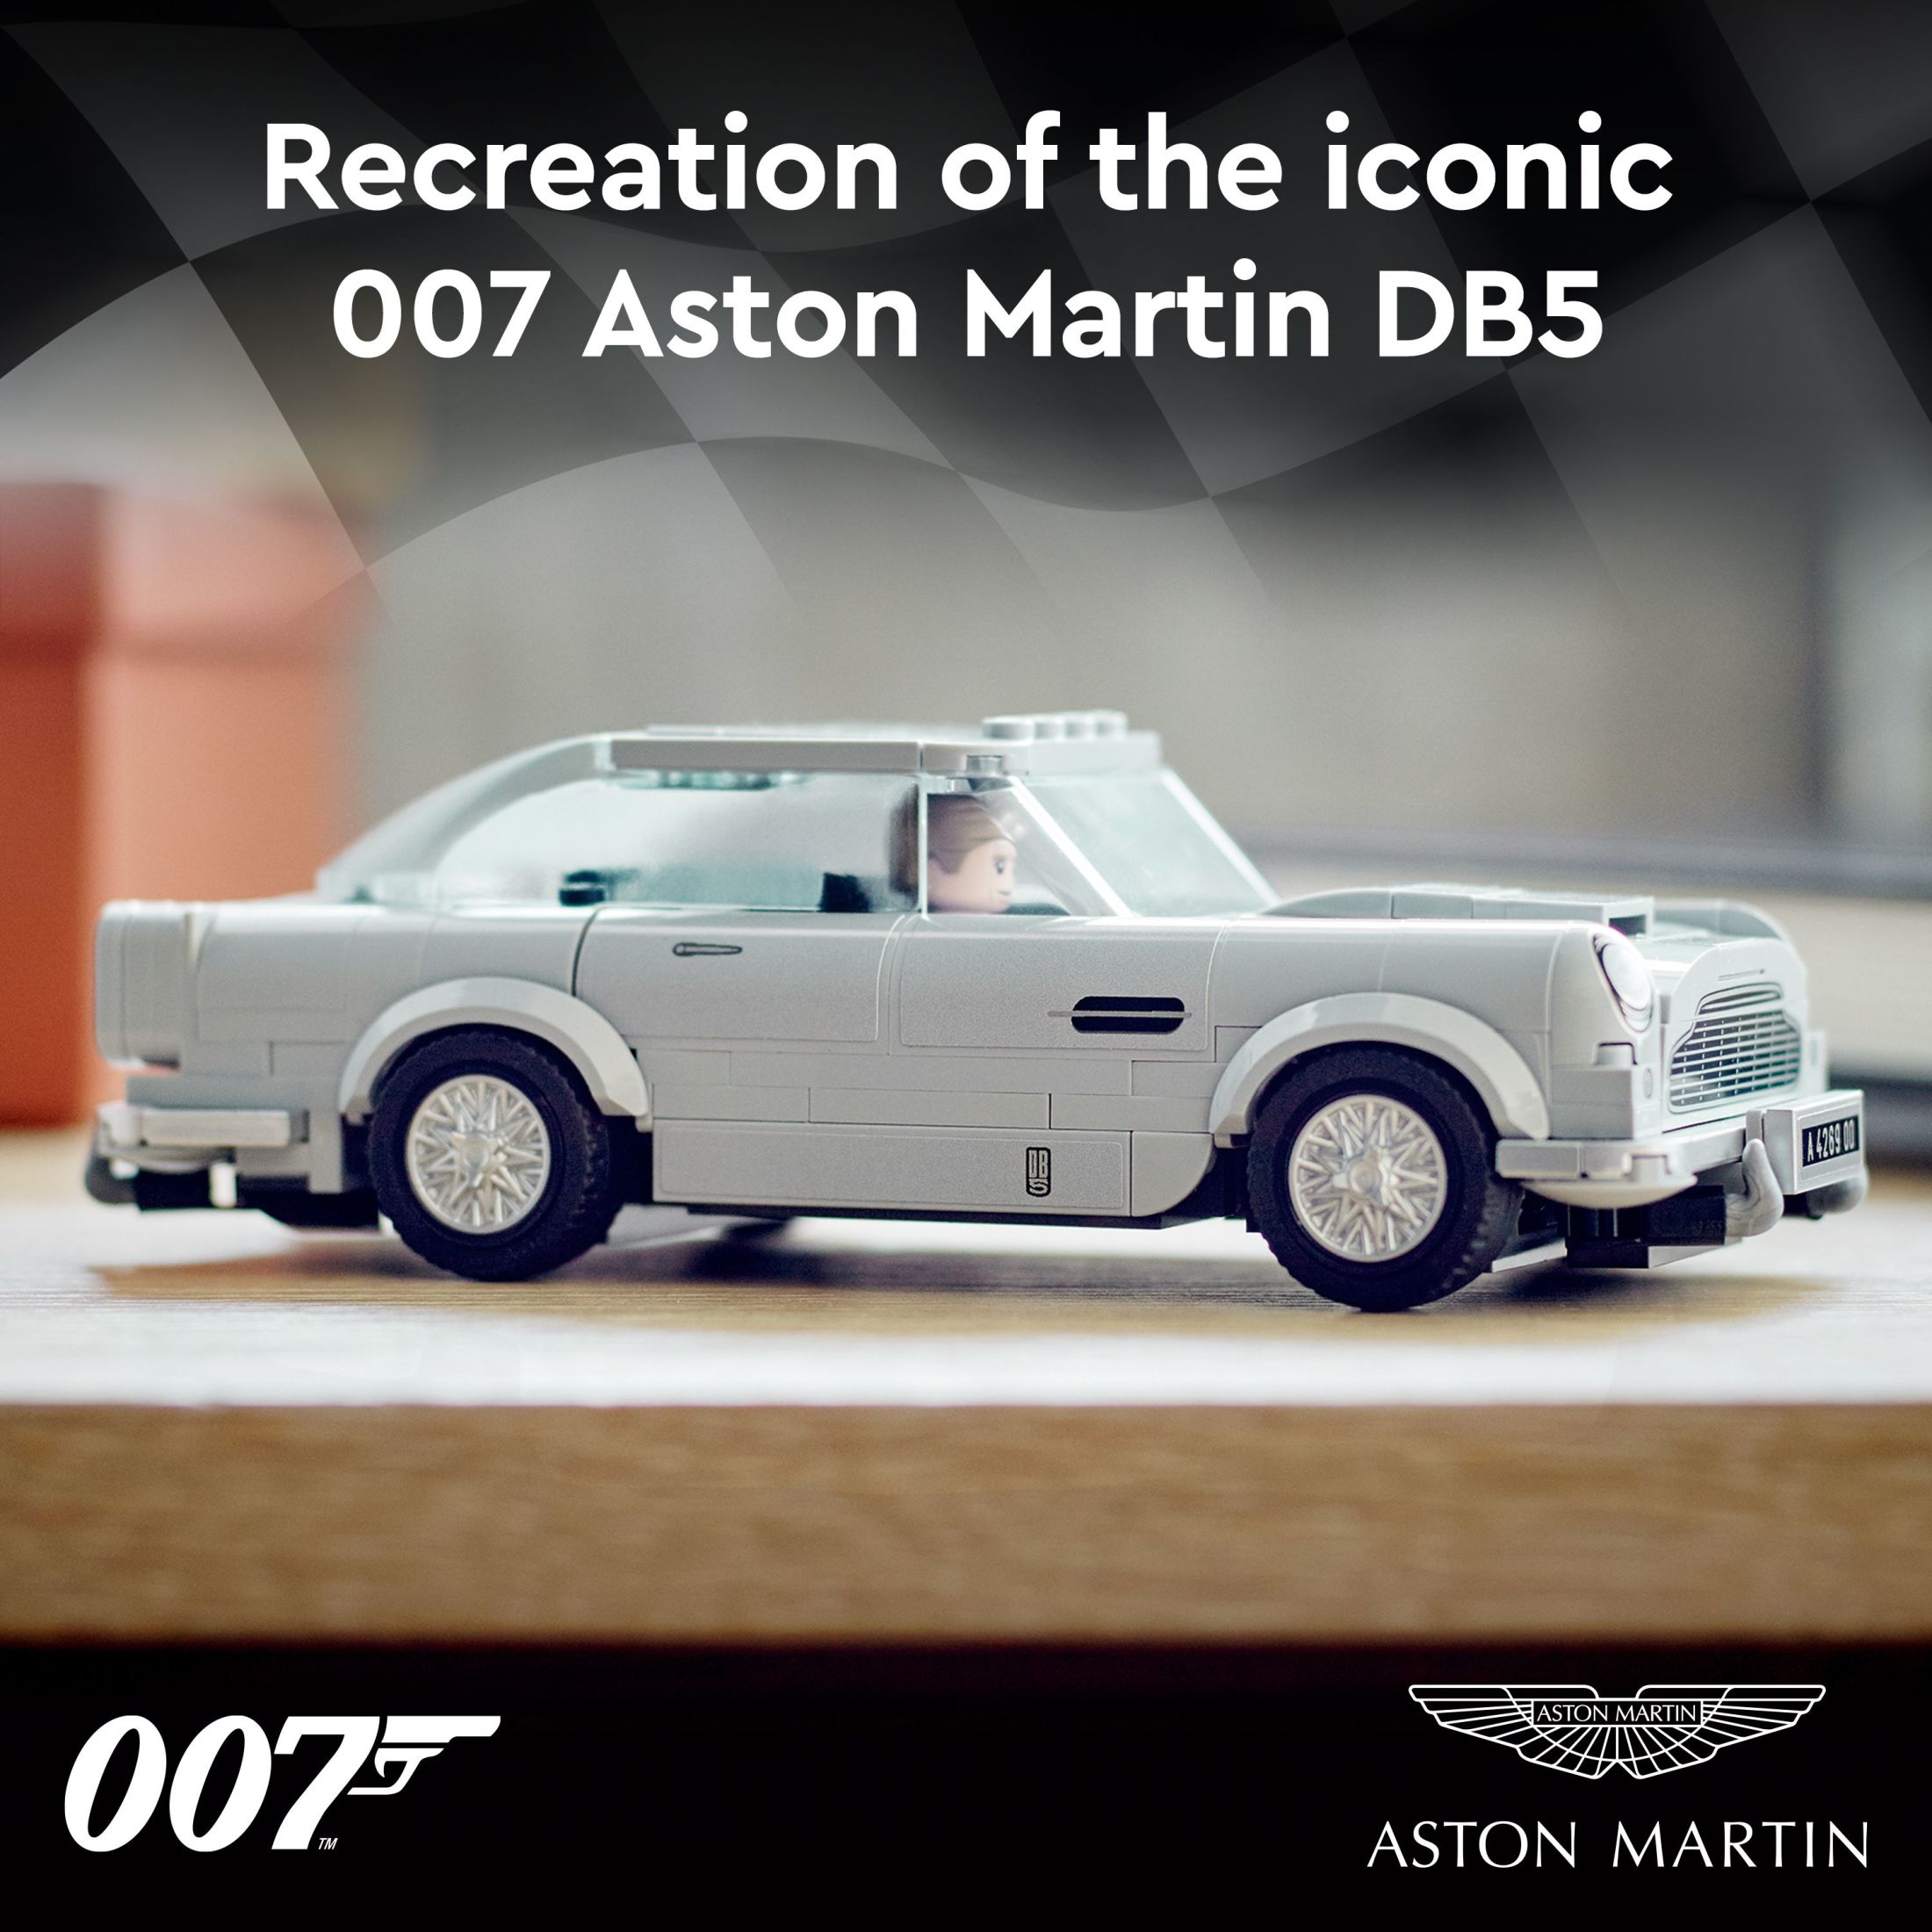 LEGO Speed Champions 007 Aston Martin DB5 76911 Building Toy Set Featuring James Bond Minifigure, Car Model Kit for Kids and Teens, Great Gift for Boys and Girls Ages 8 and Up - image 4 of 8